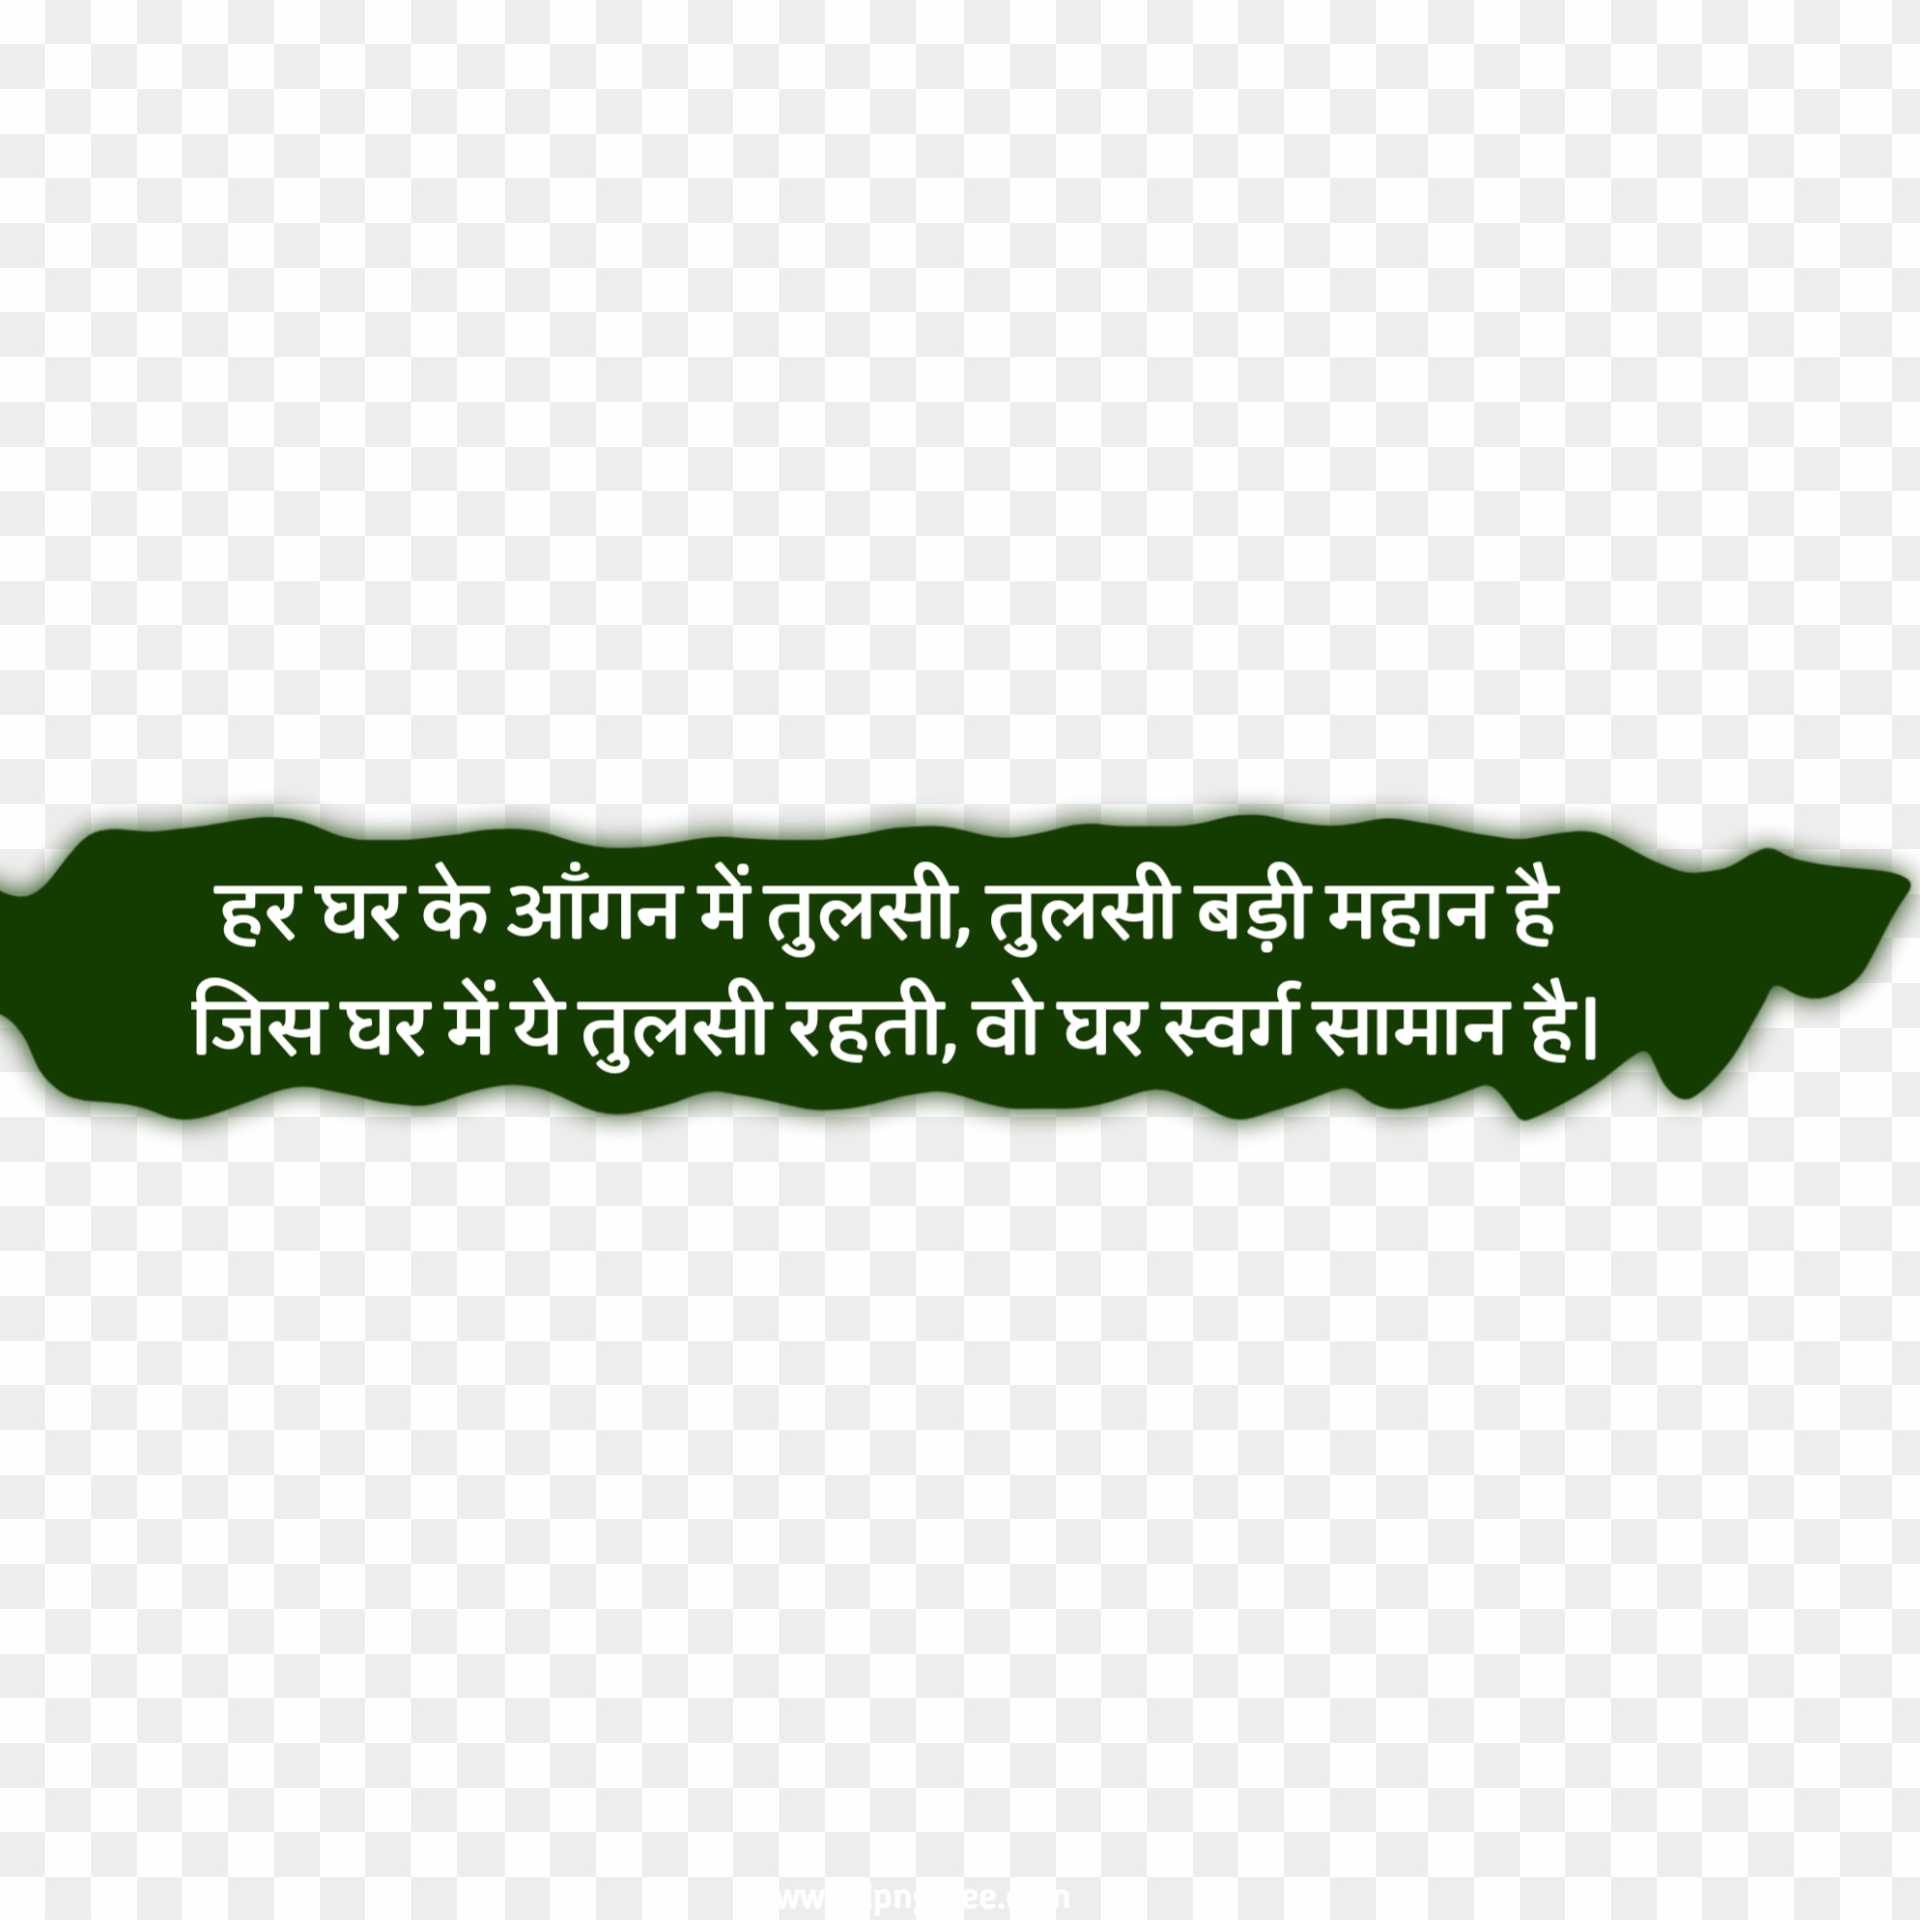 Tulsi Puja quotes in Hindi text PNG 